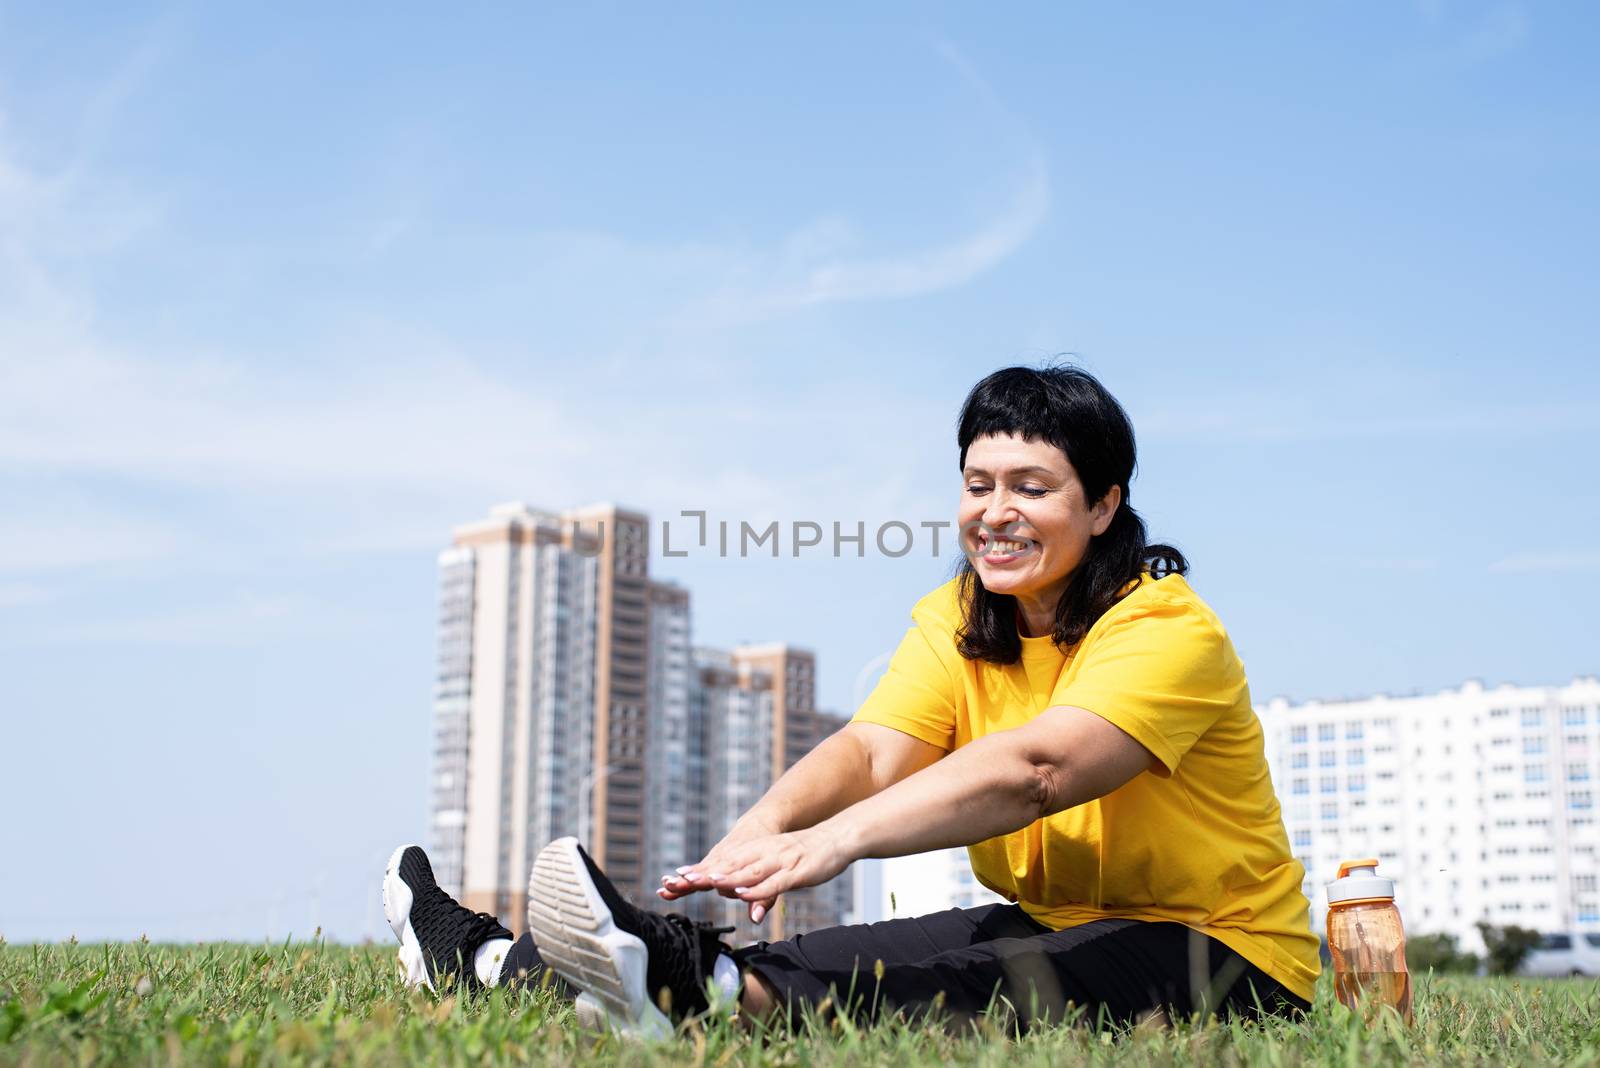 Sport and fitness. Senior sport. Active seniors. Senior woman stretching her legs on grass in the park on urban background